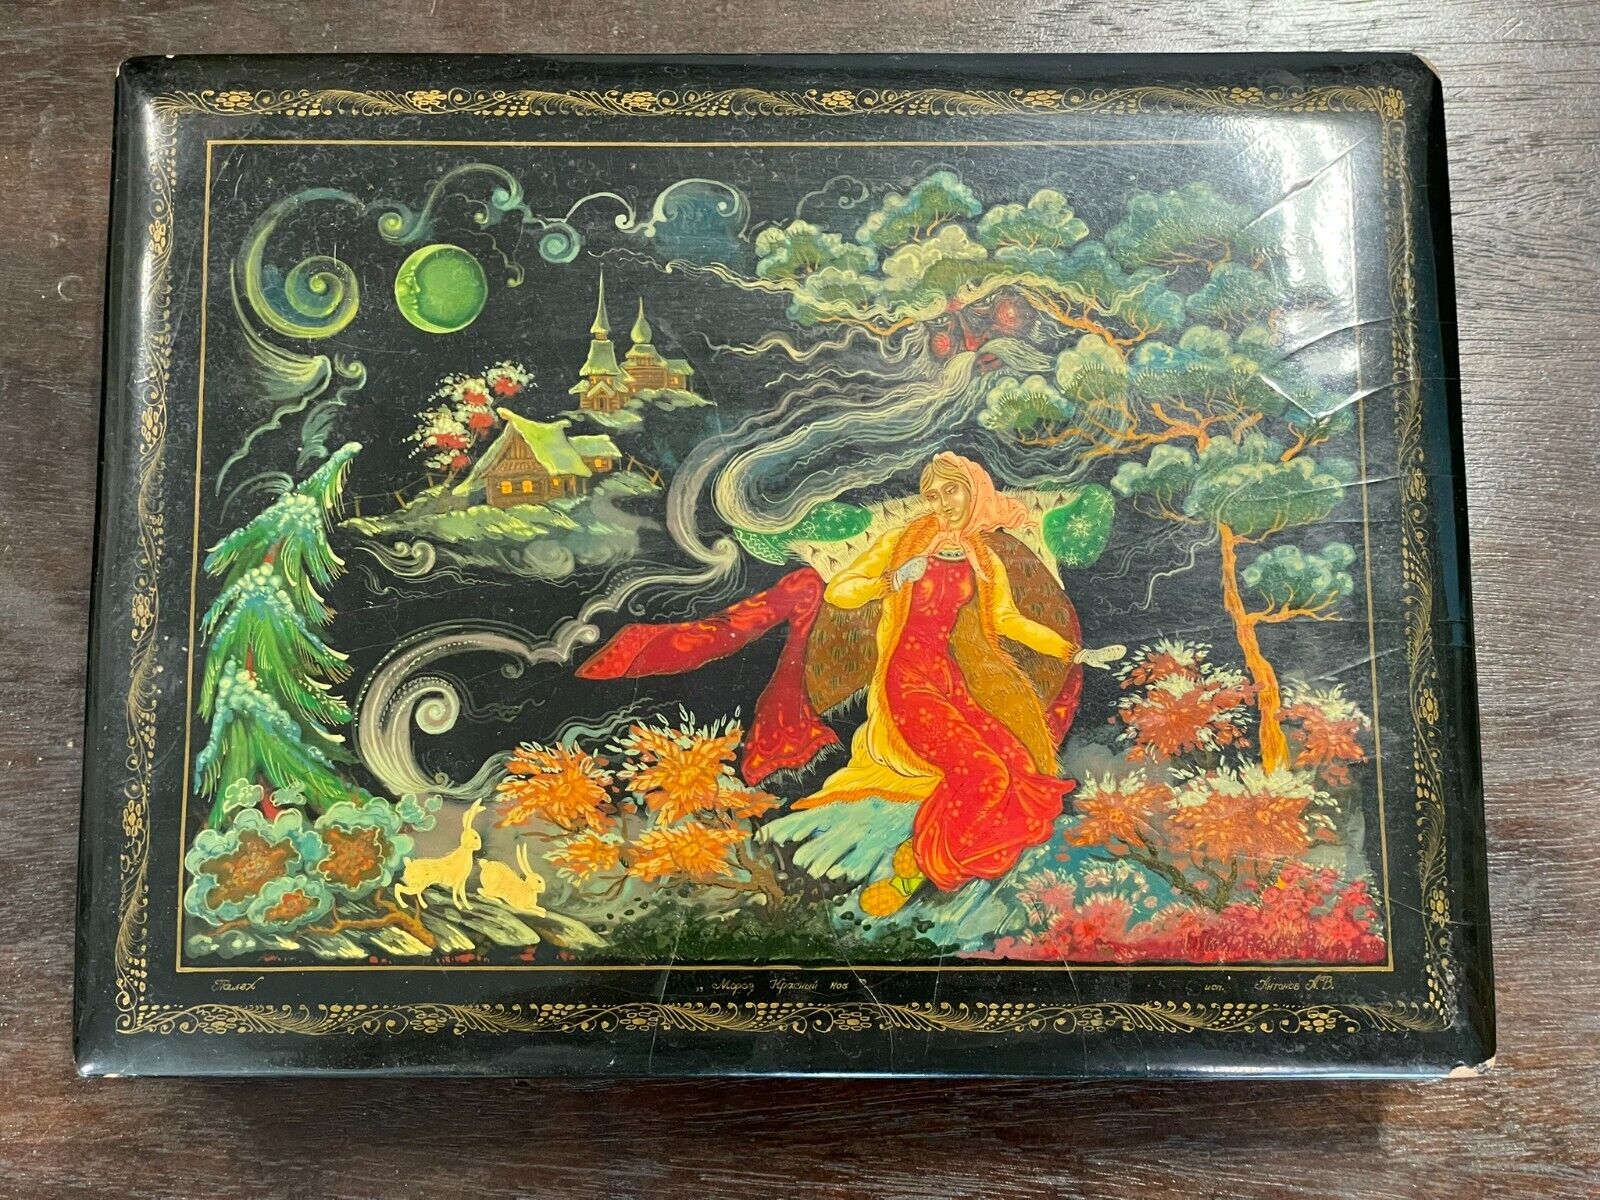 Vintage Antique Russian Lacquer Box 1950s Vopilkova Palekh Sadko Father Frost